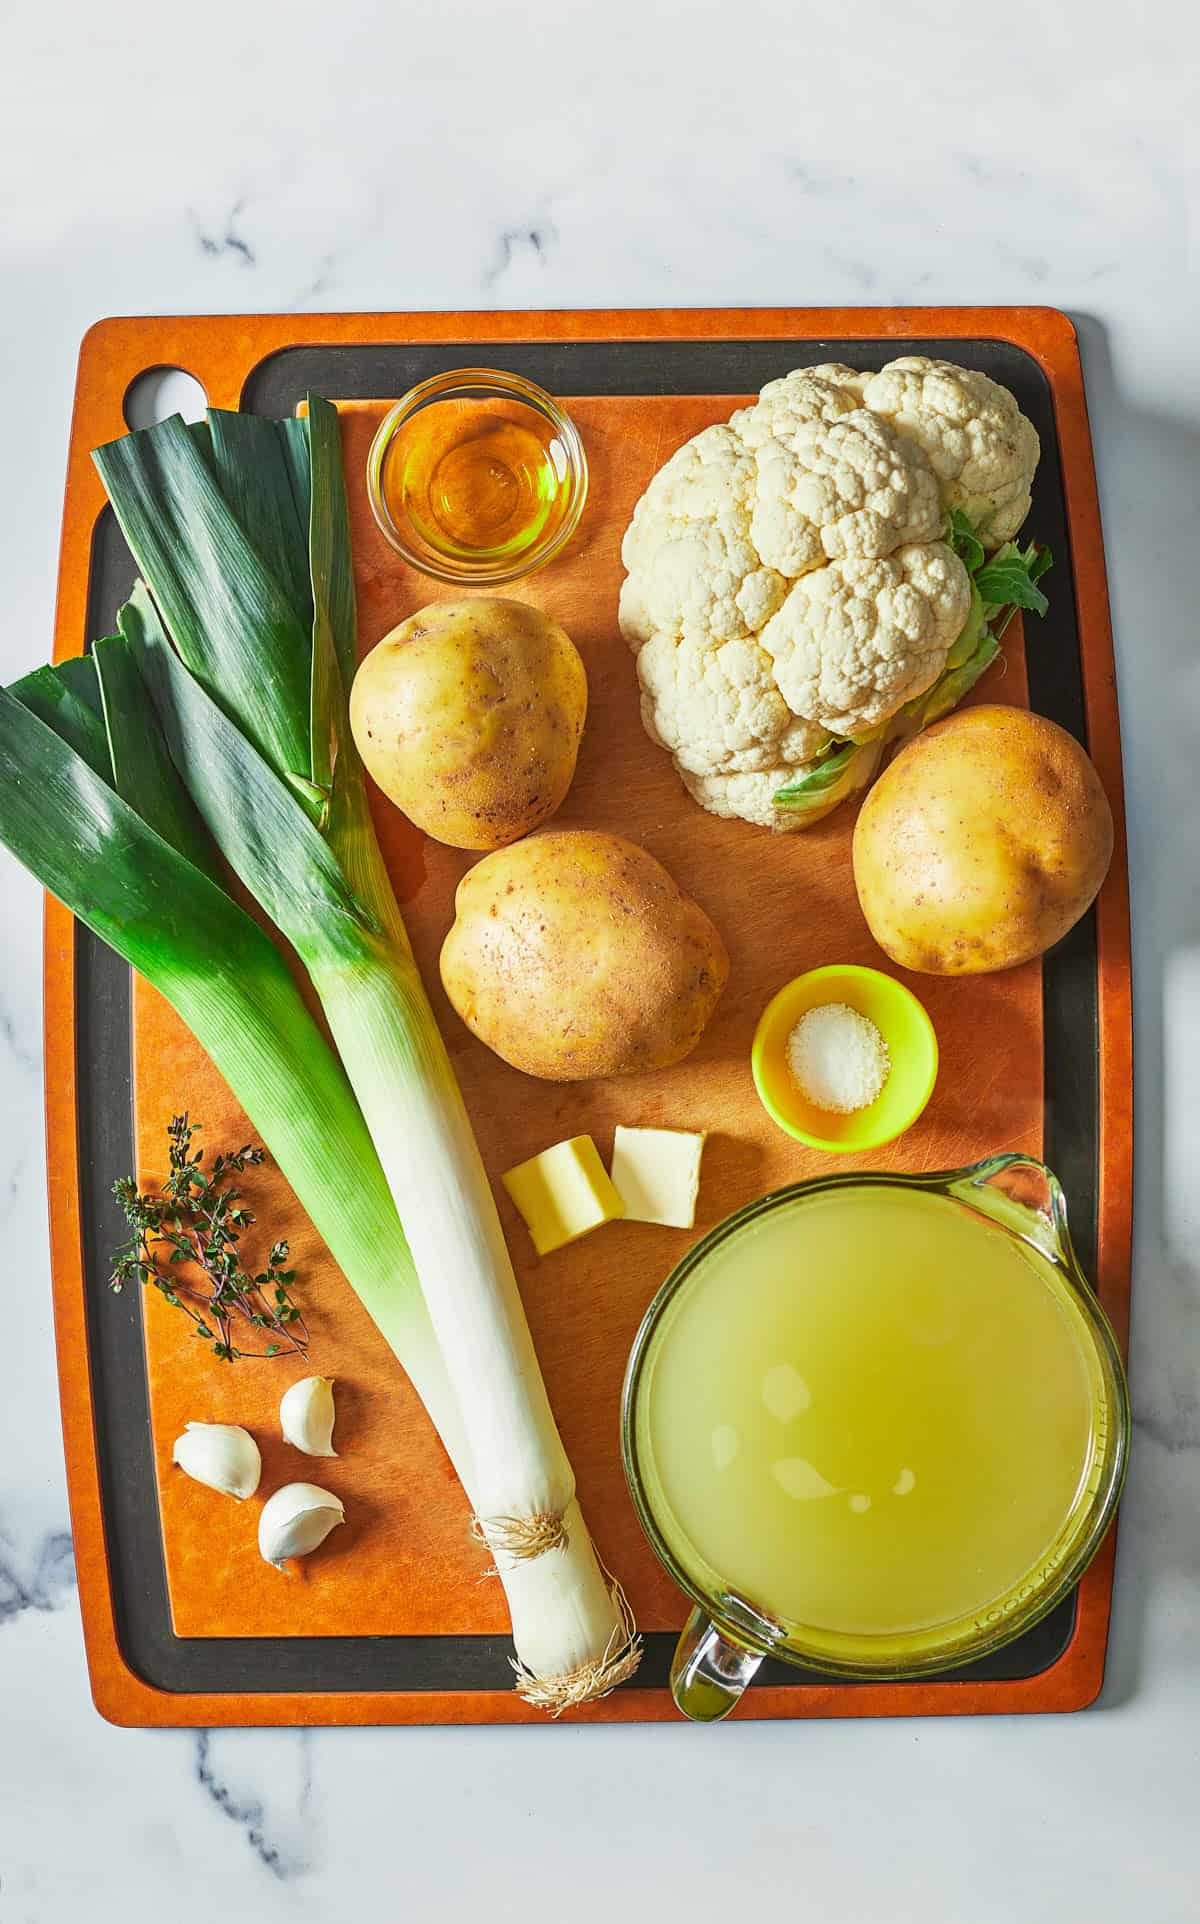 ingredients for making the cauliflower leek soup laid out on cutting board